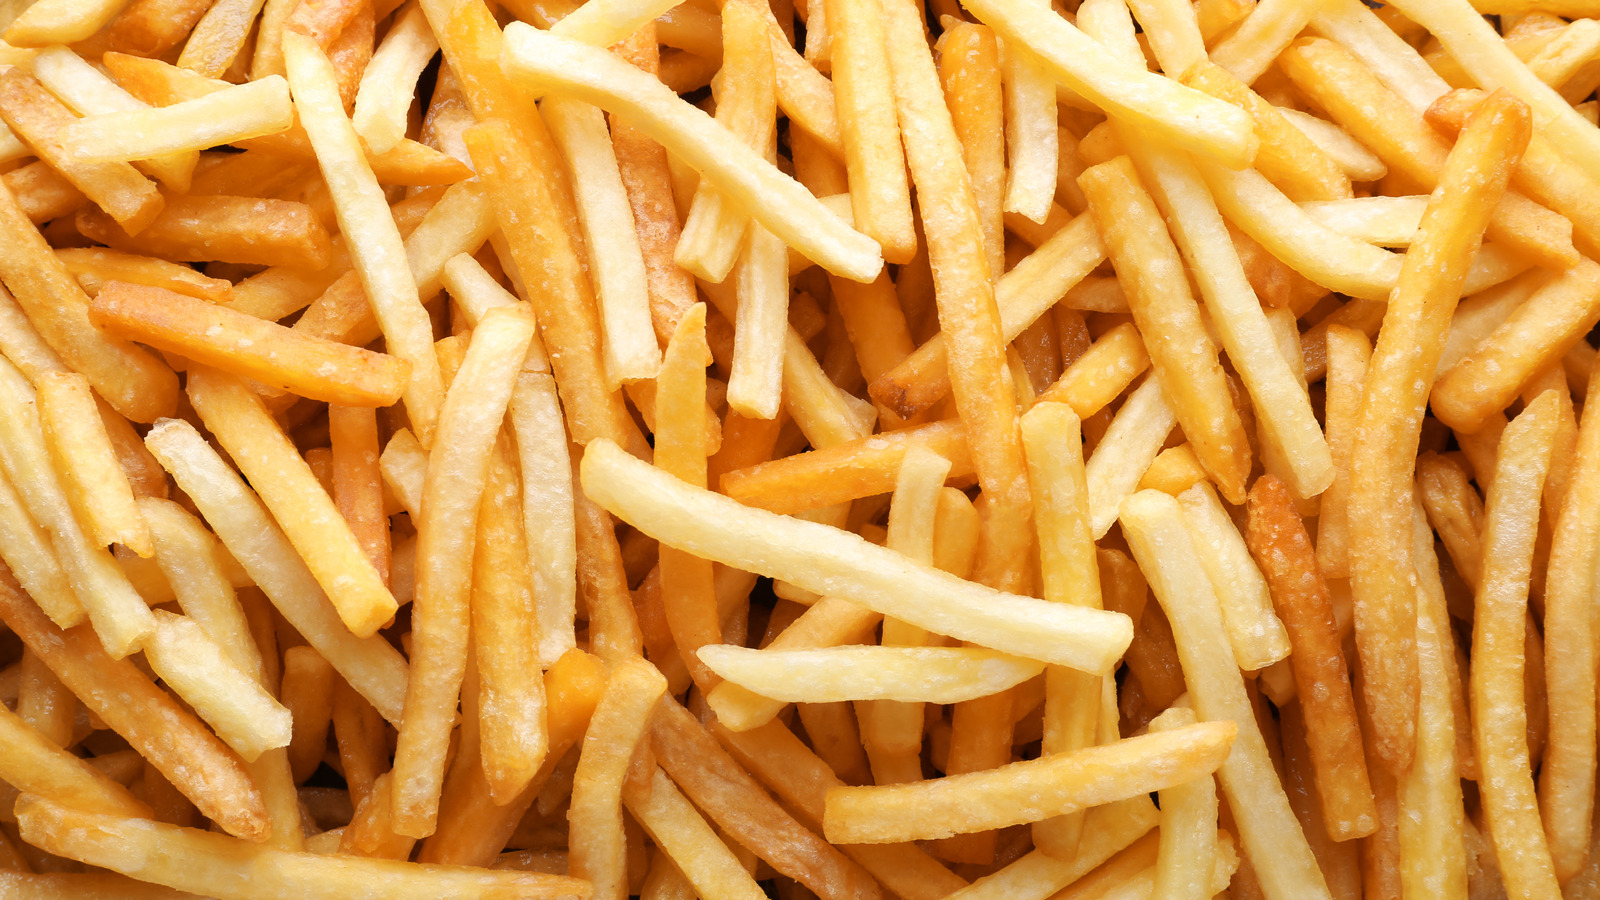 7 amazing fresh fries recipes on French fries day